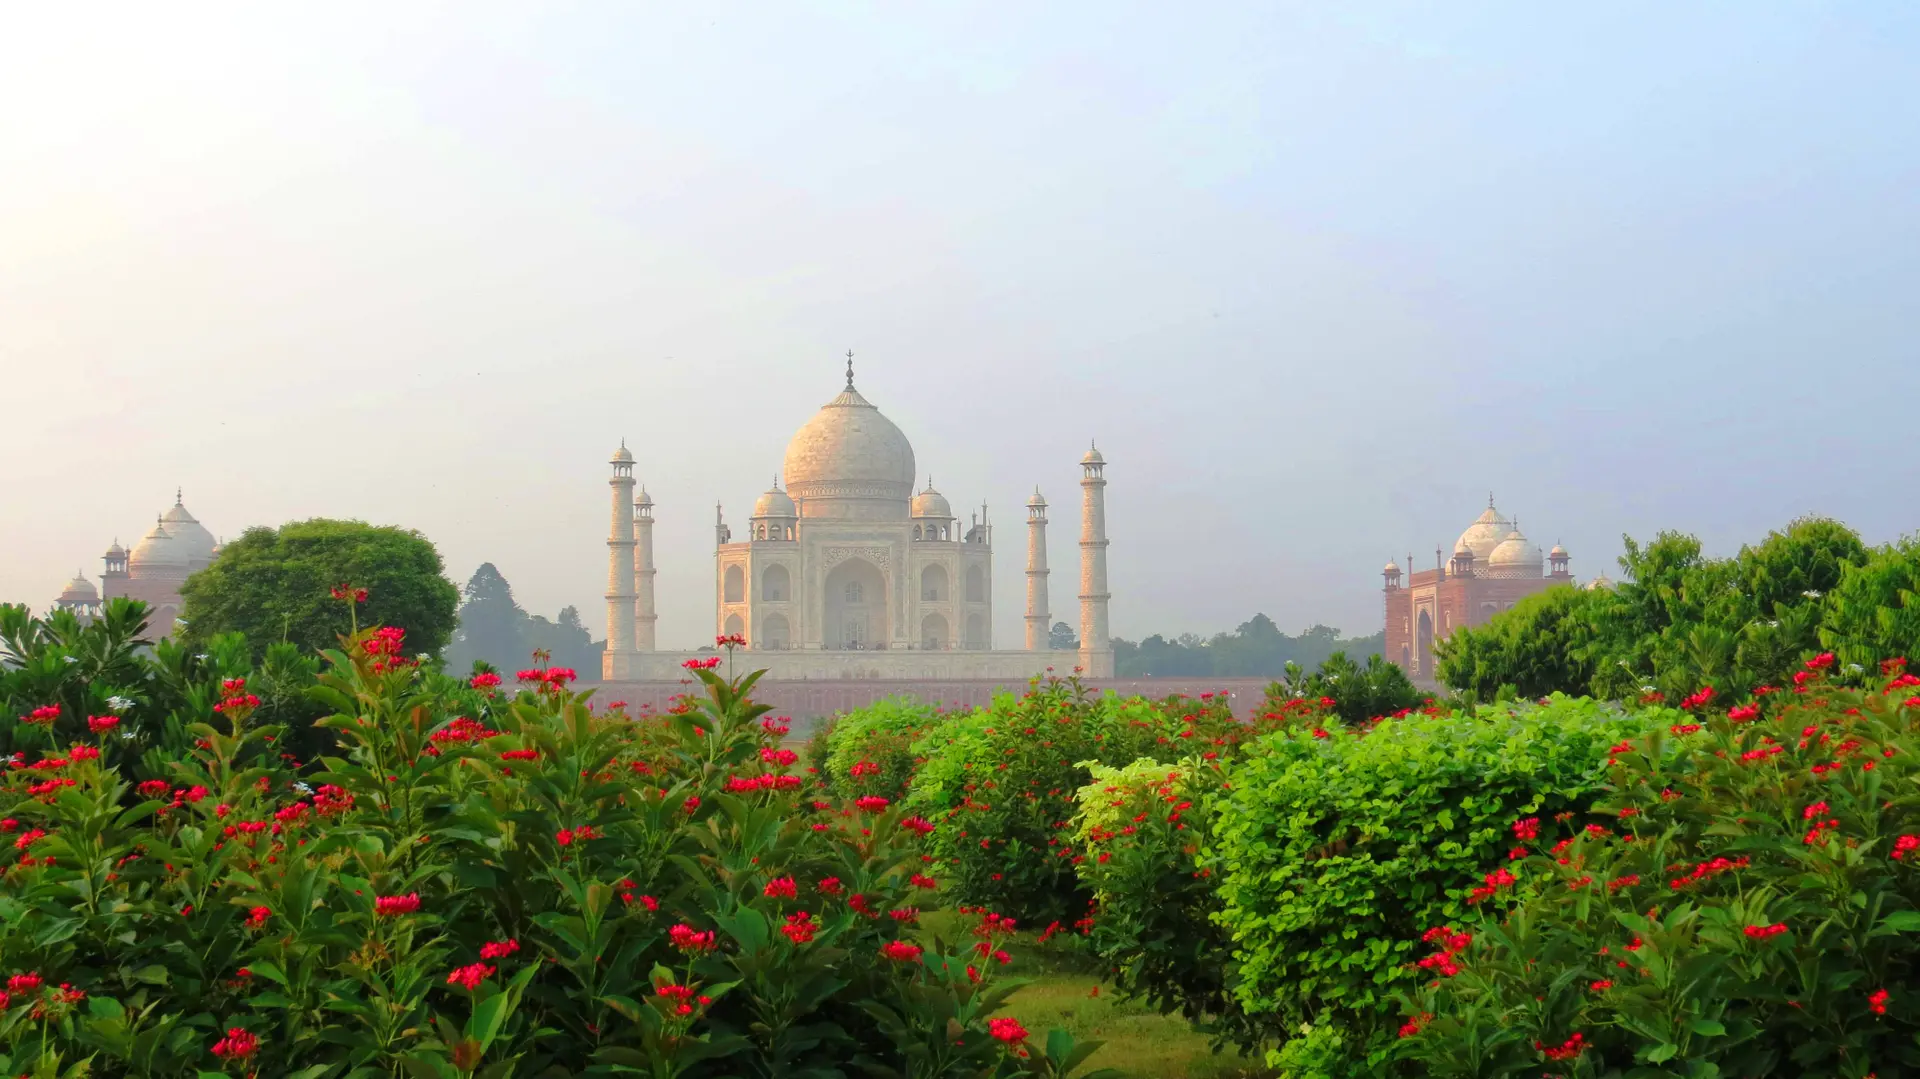 Destinations Articles - Agra Travel Guide